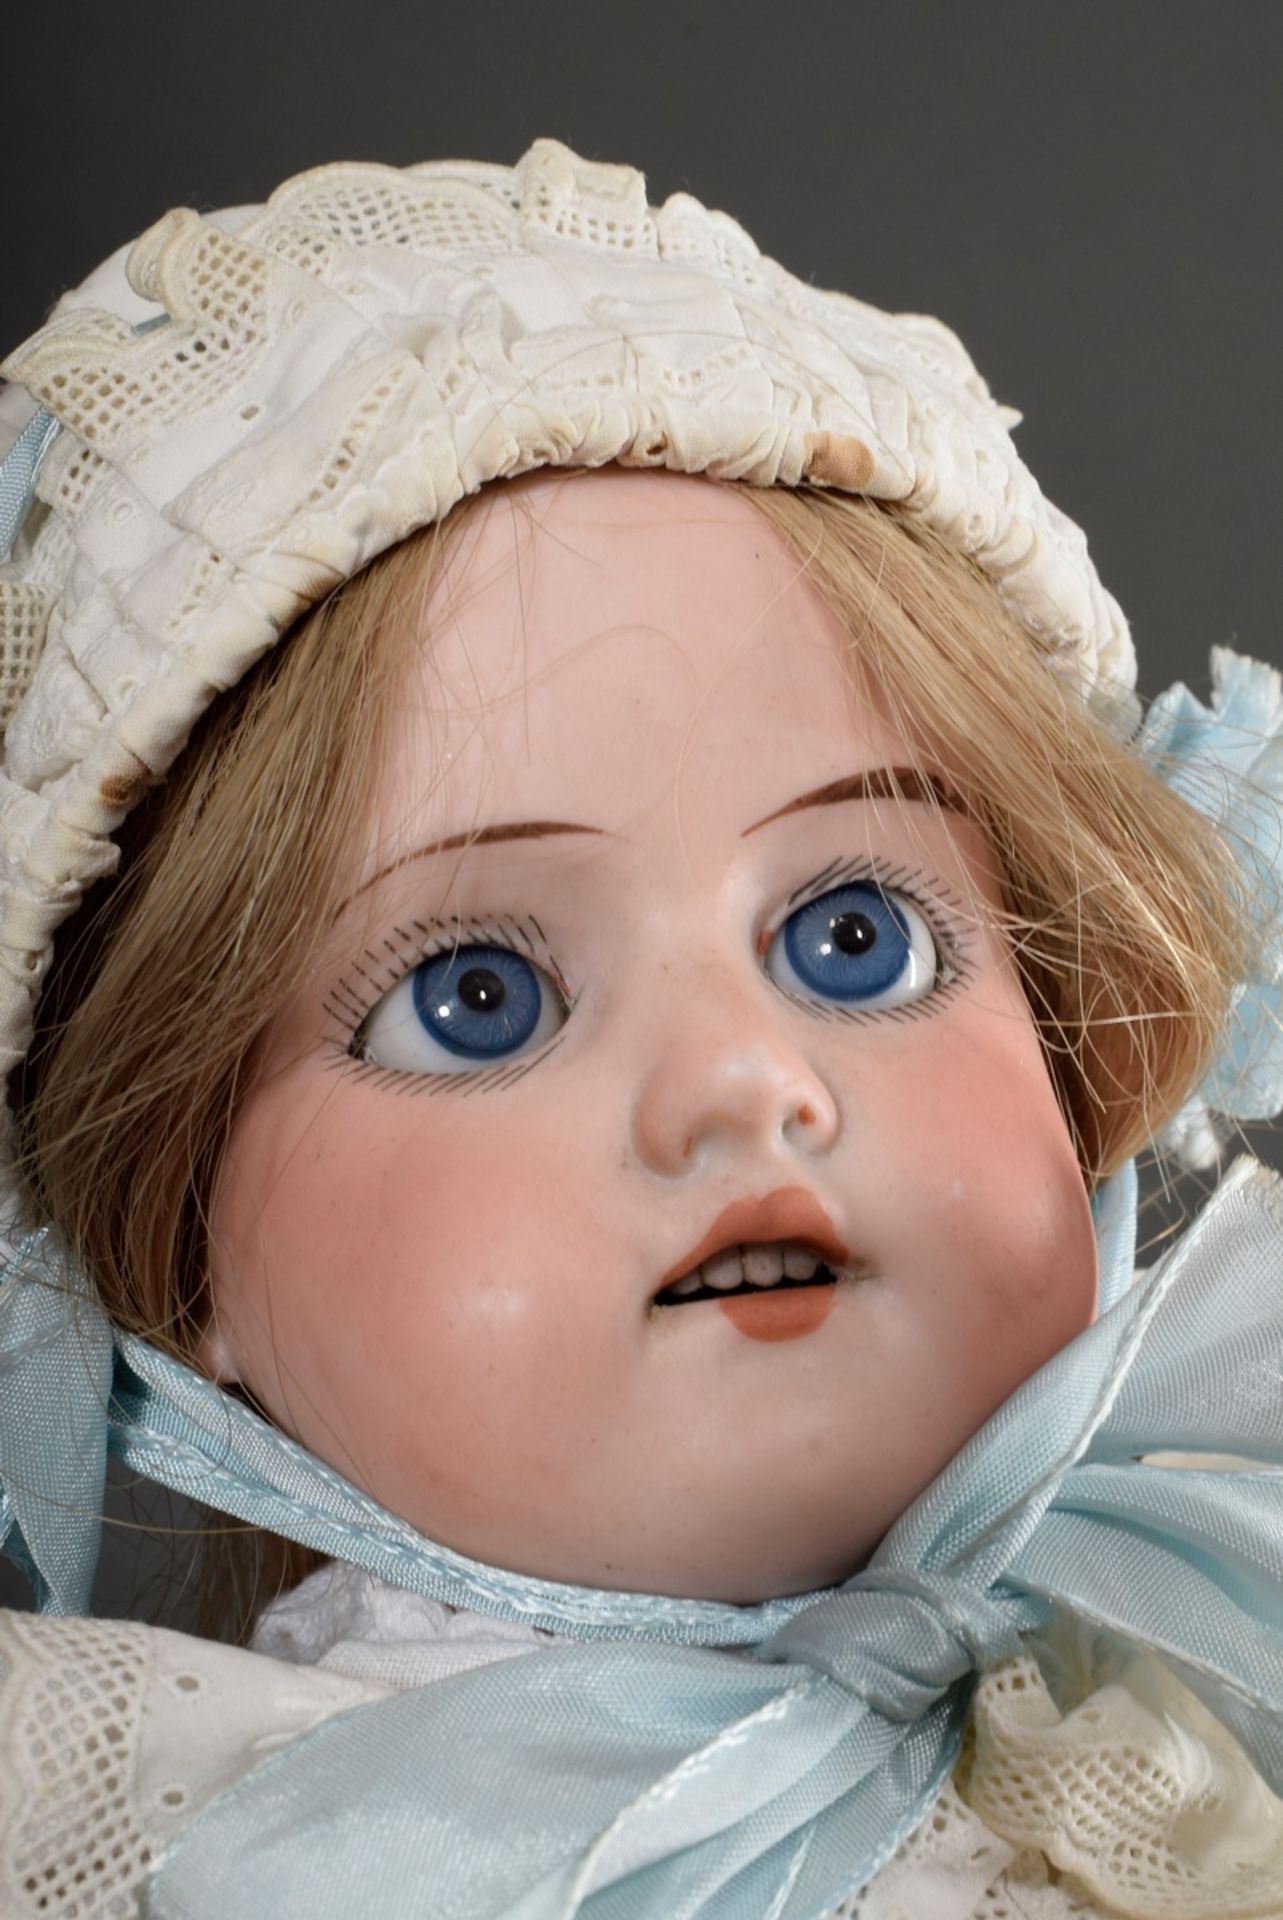 Small doll with porcelain chest head and bisque/leather body, blond real hair wig, blue glass eyes, - Image 4 of 8